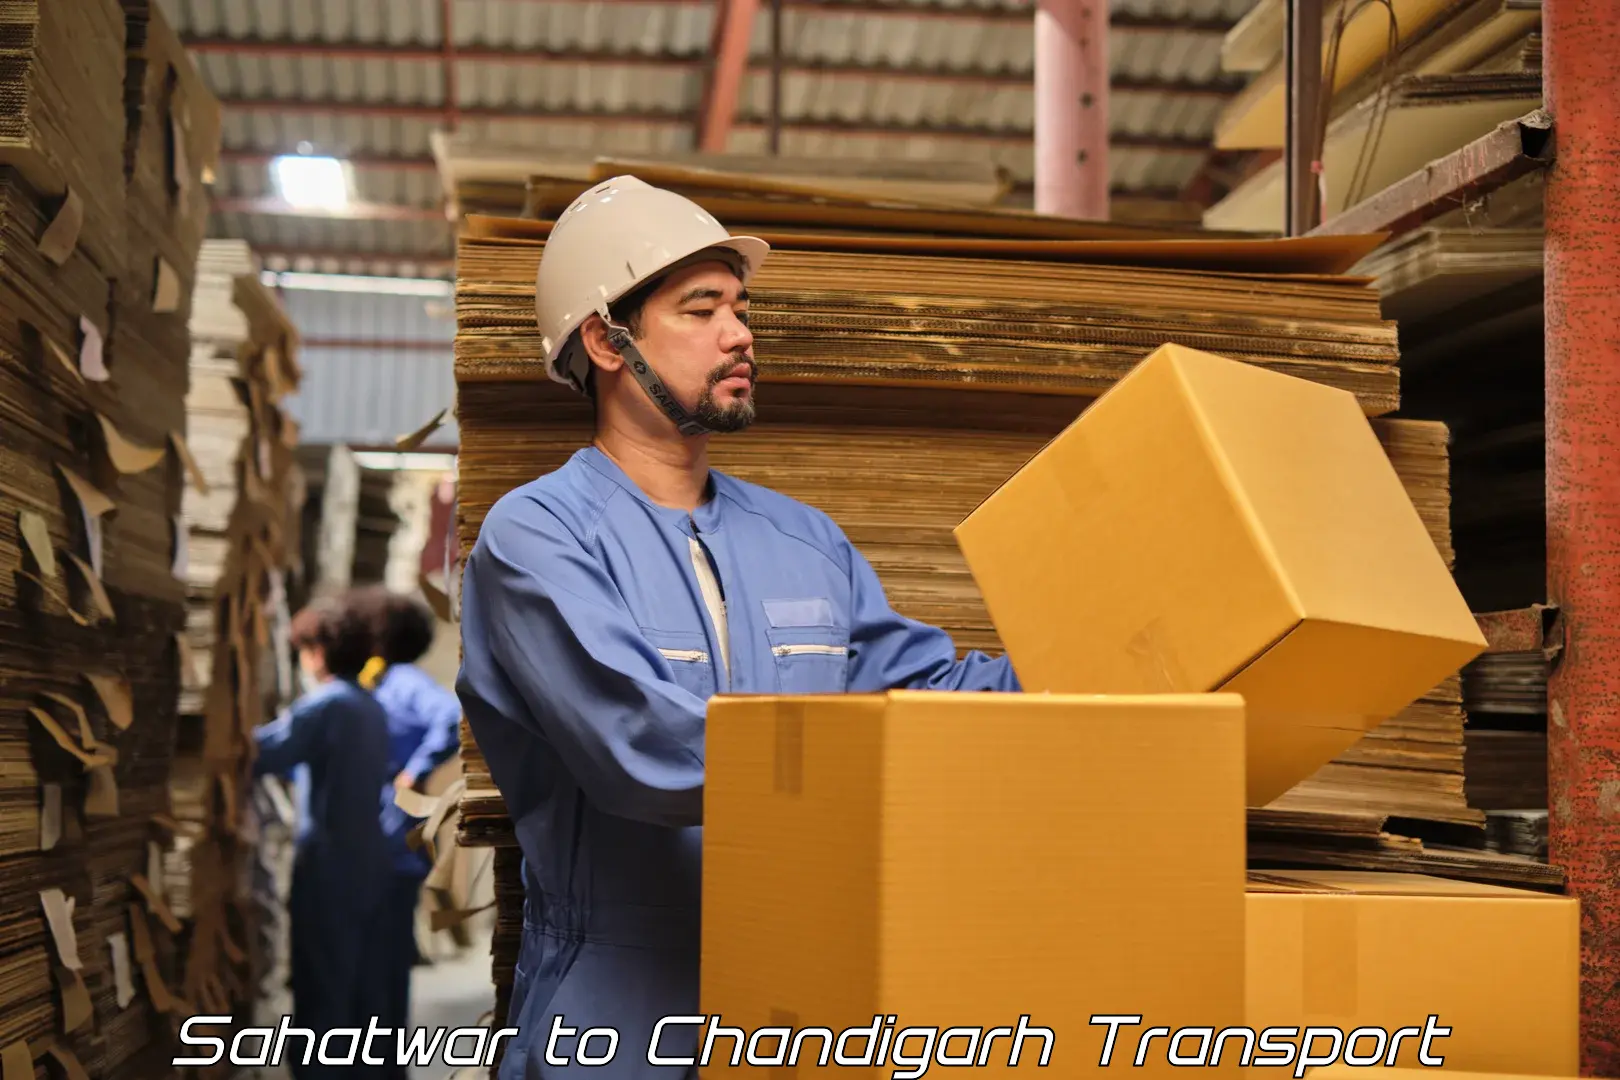 Part load transport service in India Sahatwar to Chandigarh